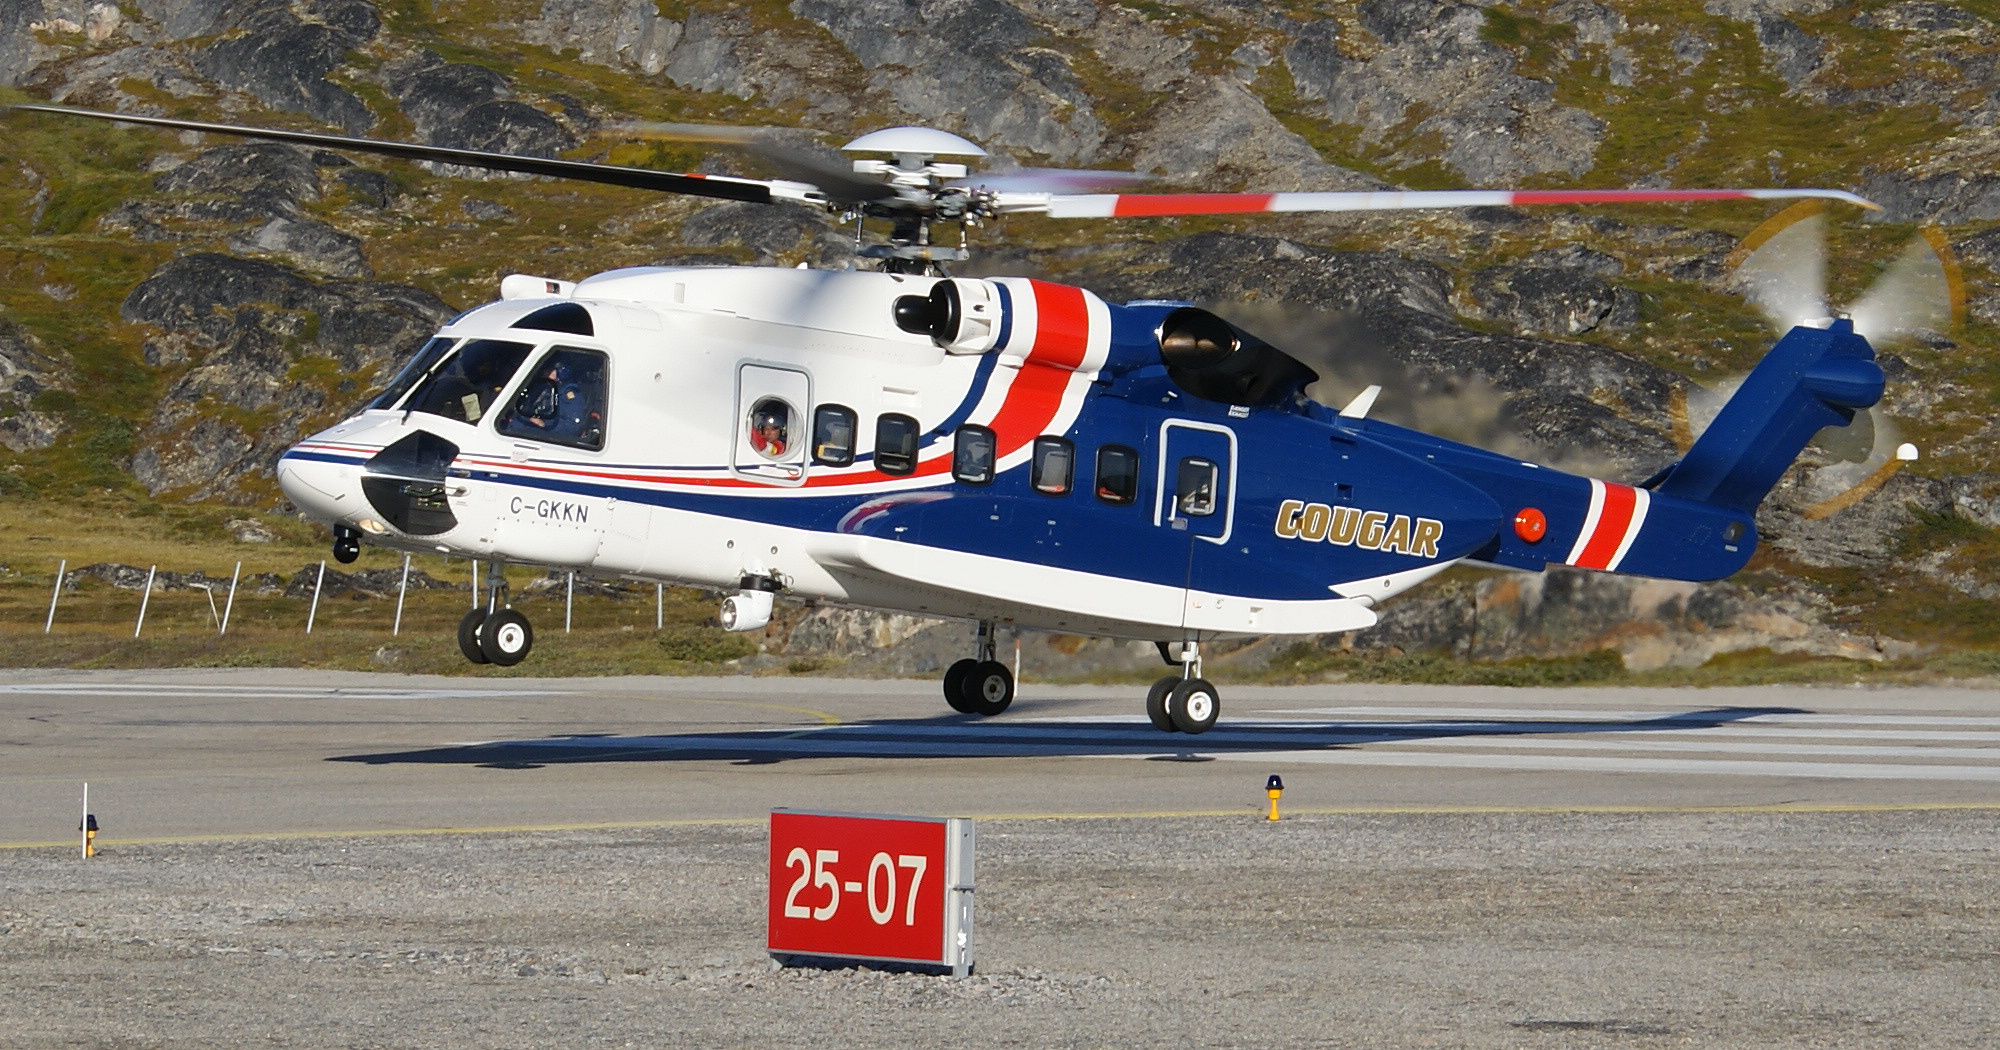 Sikorsky-S92-cougar-helicopters-ilulissat-airport